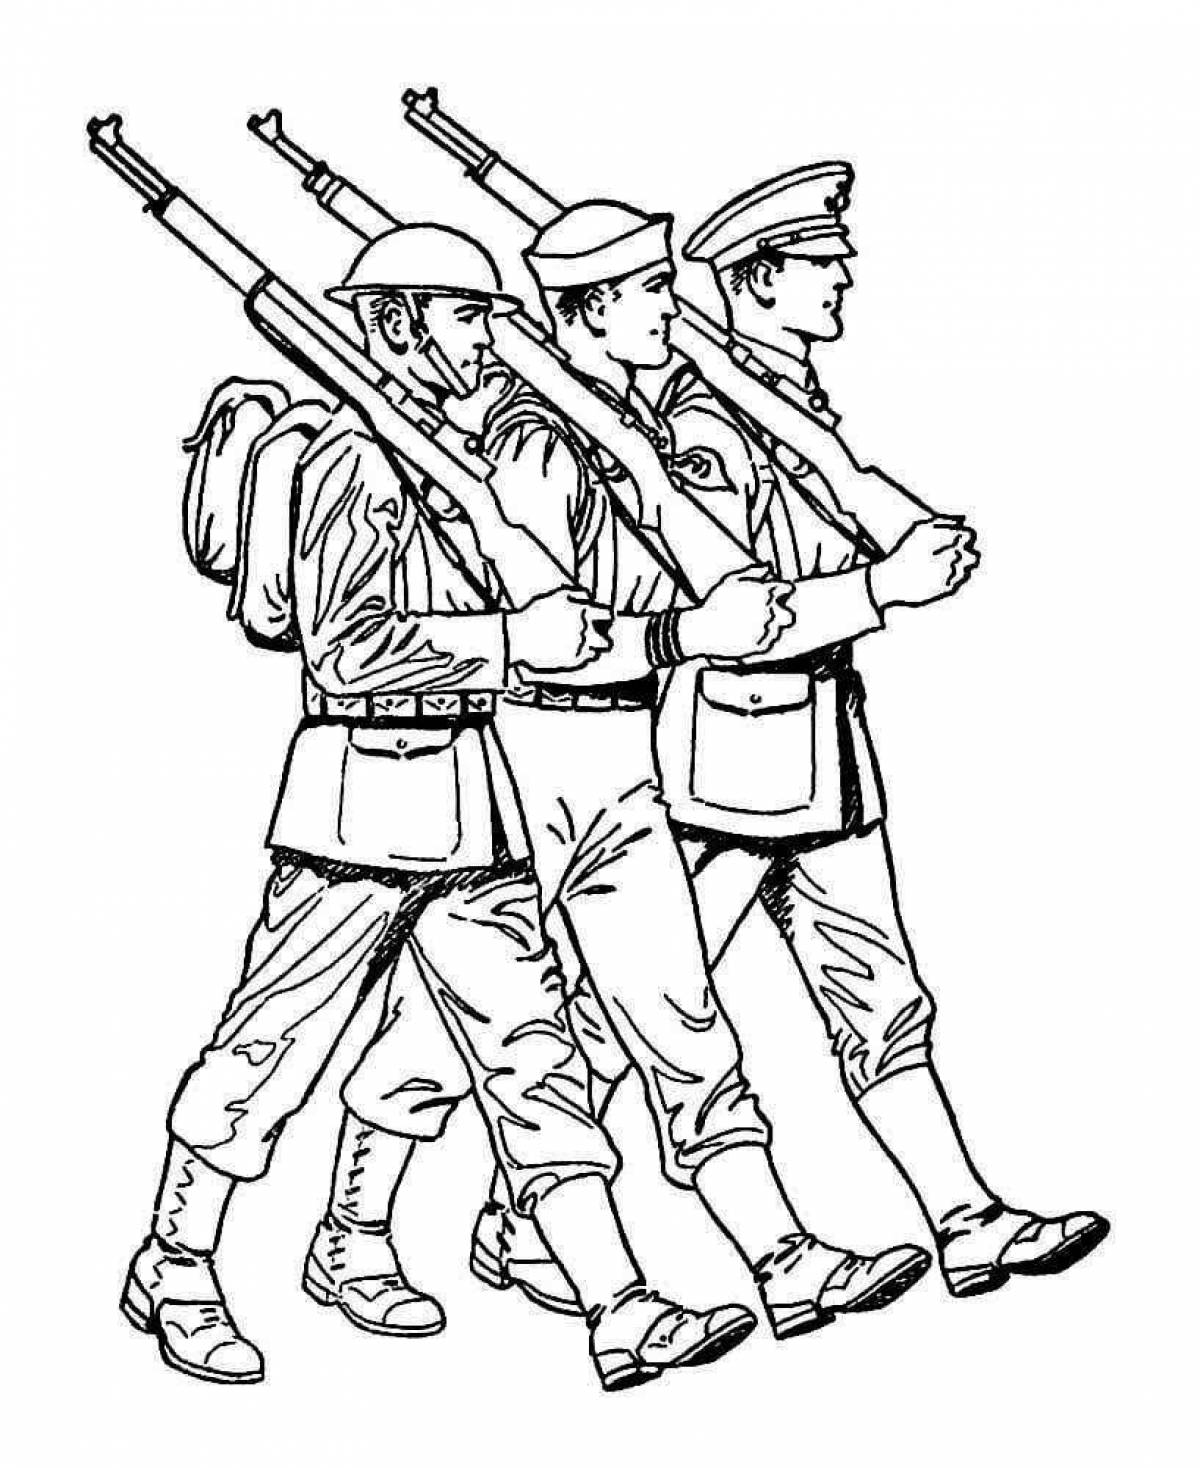 Coloring pages of military soldiers